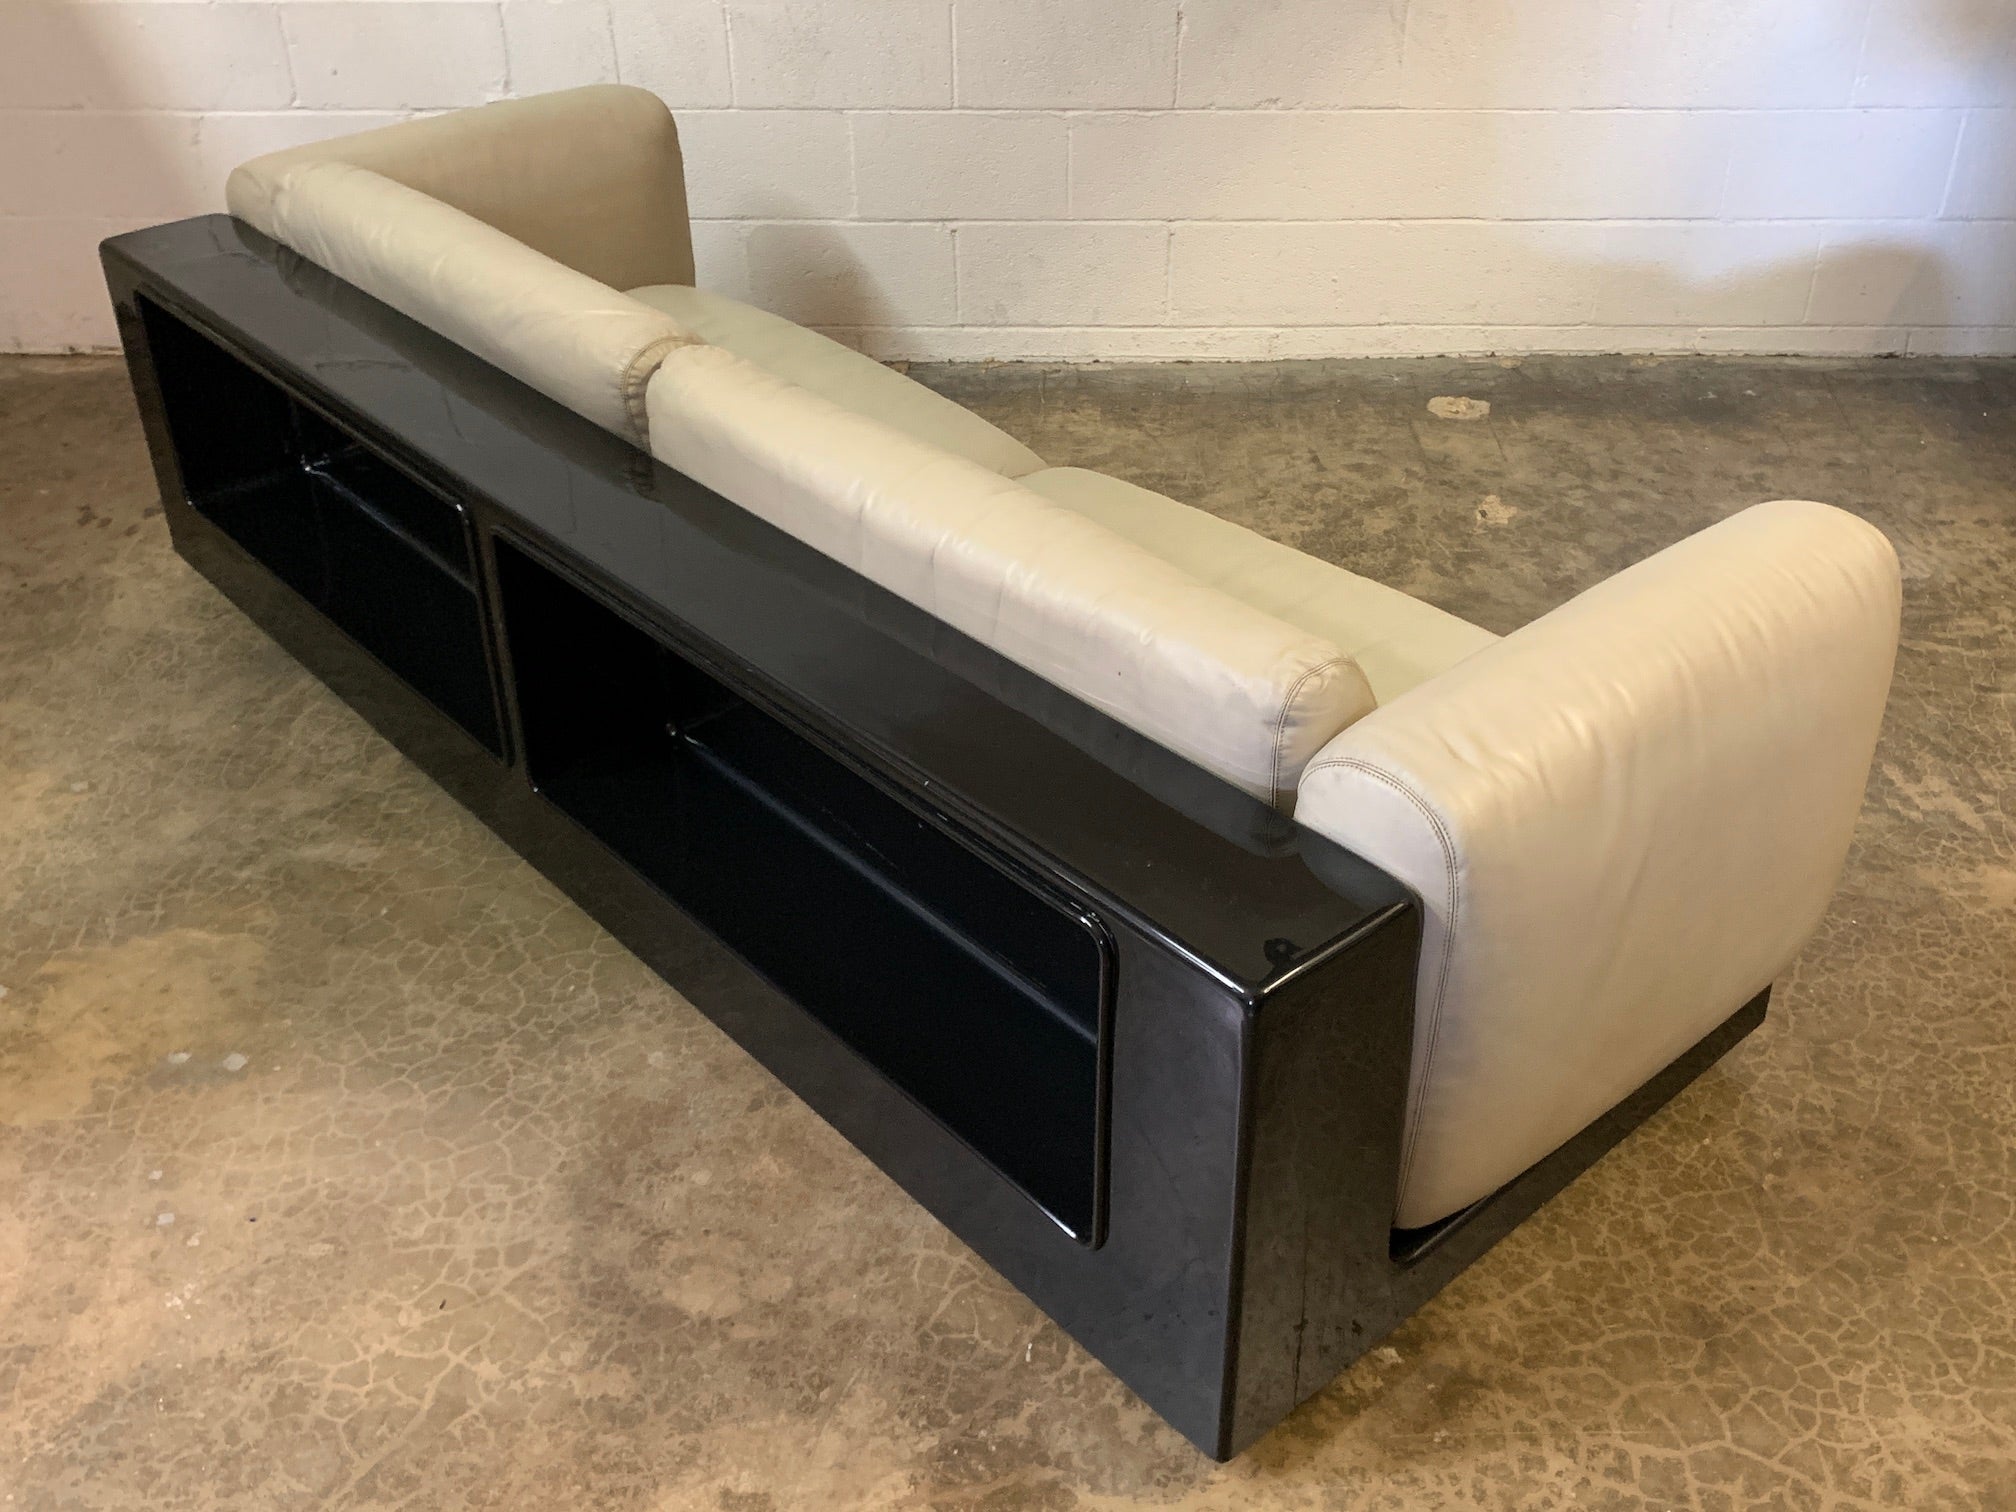 Part of the 'Gradual' seating system designed by Cici Boeri and sold through Gavina / Knoll in 1971. This sofa has a dark brown fiberglass frame with intergraded shelf and casters. The original cream colored leather is supple and has a nice even